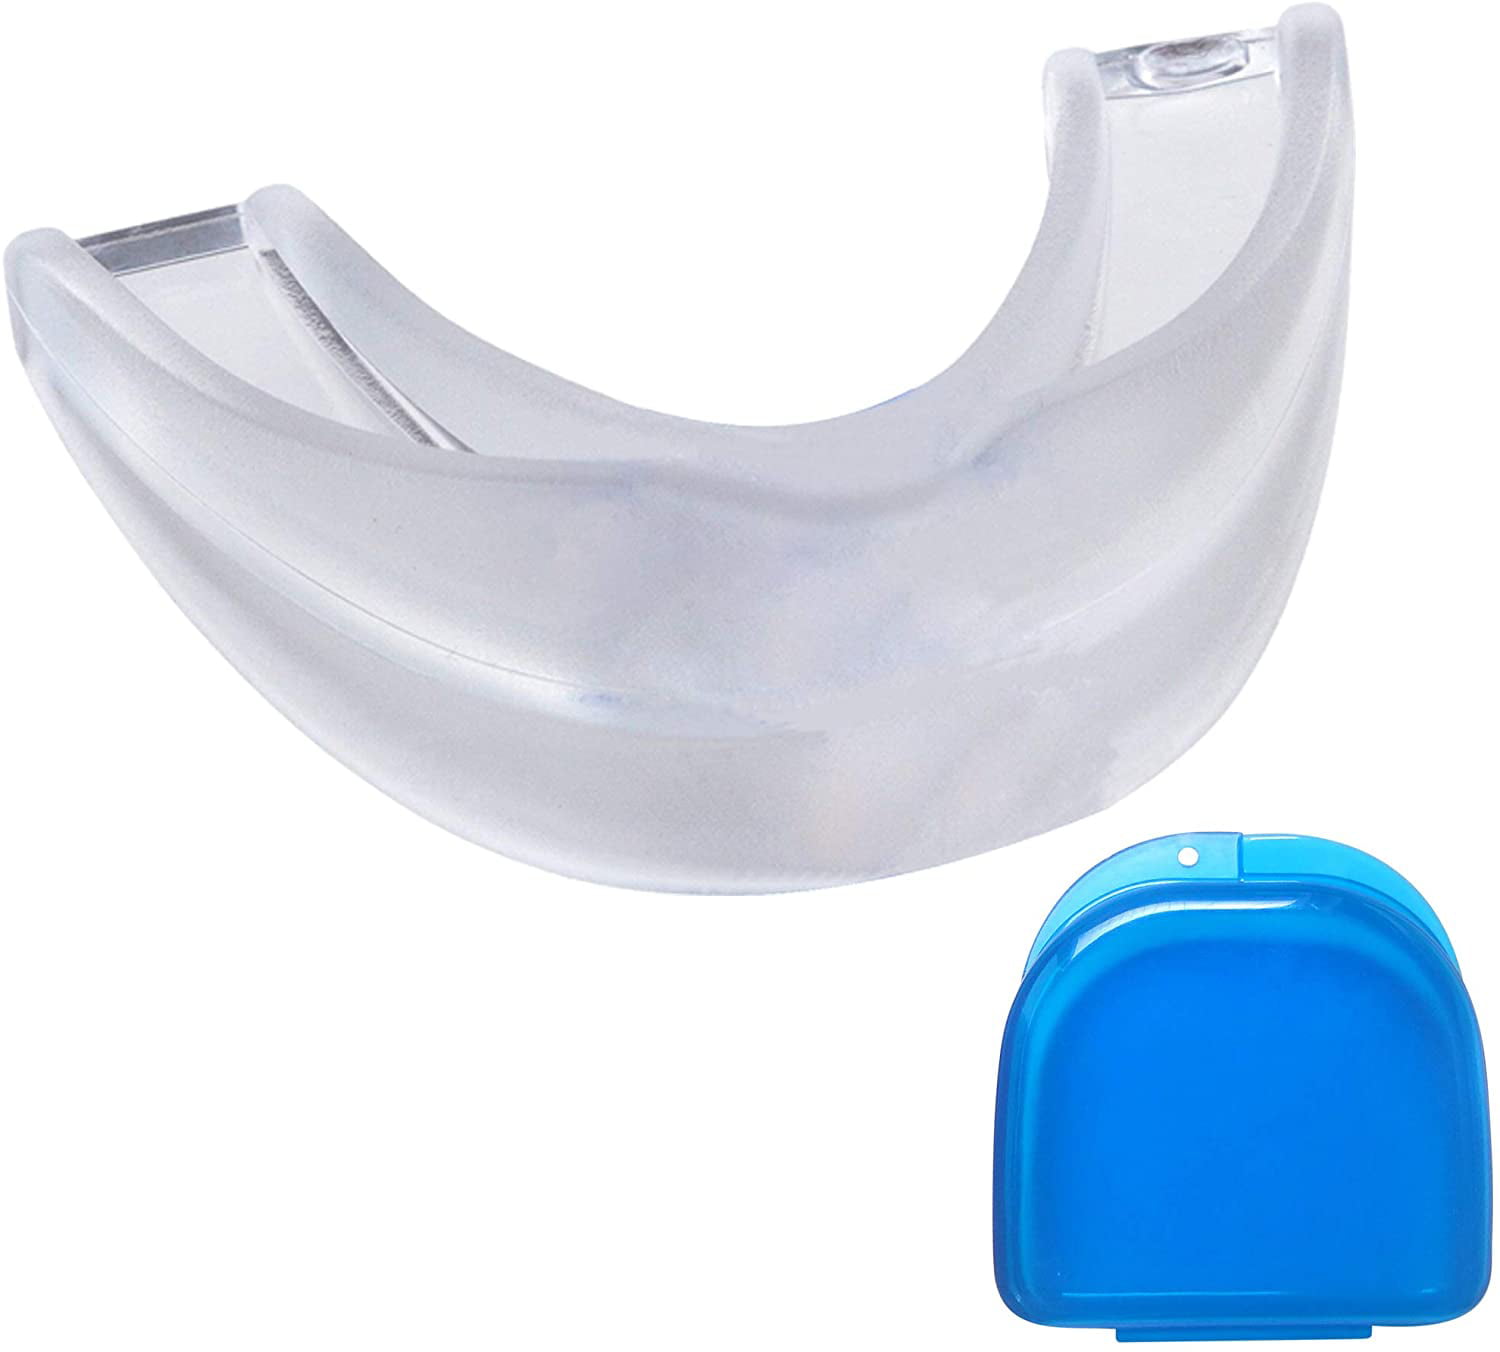 Roller Derby Waterproof Mouth Guard Case Retainer Case Ship In A Bottle made to order